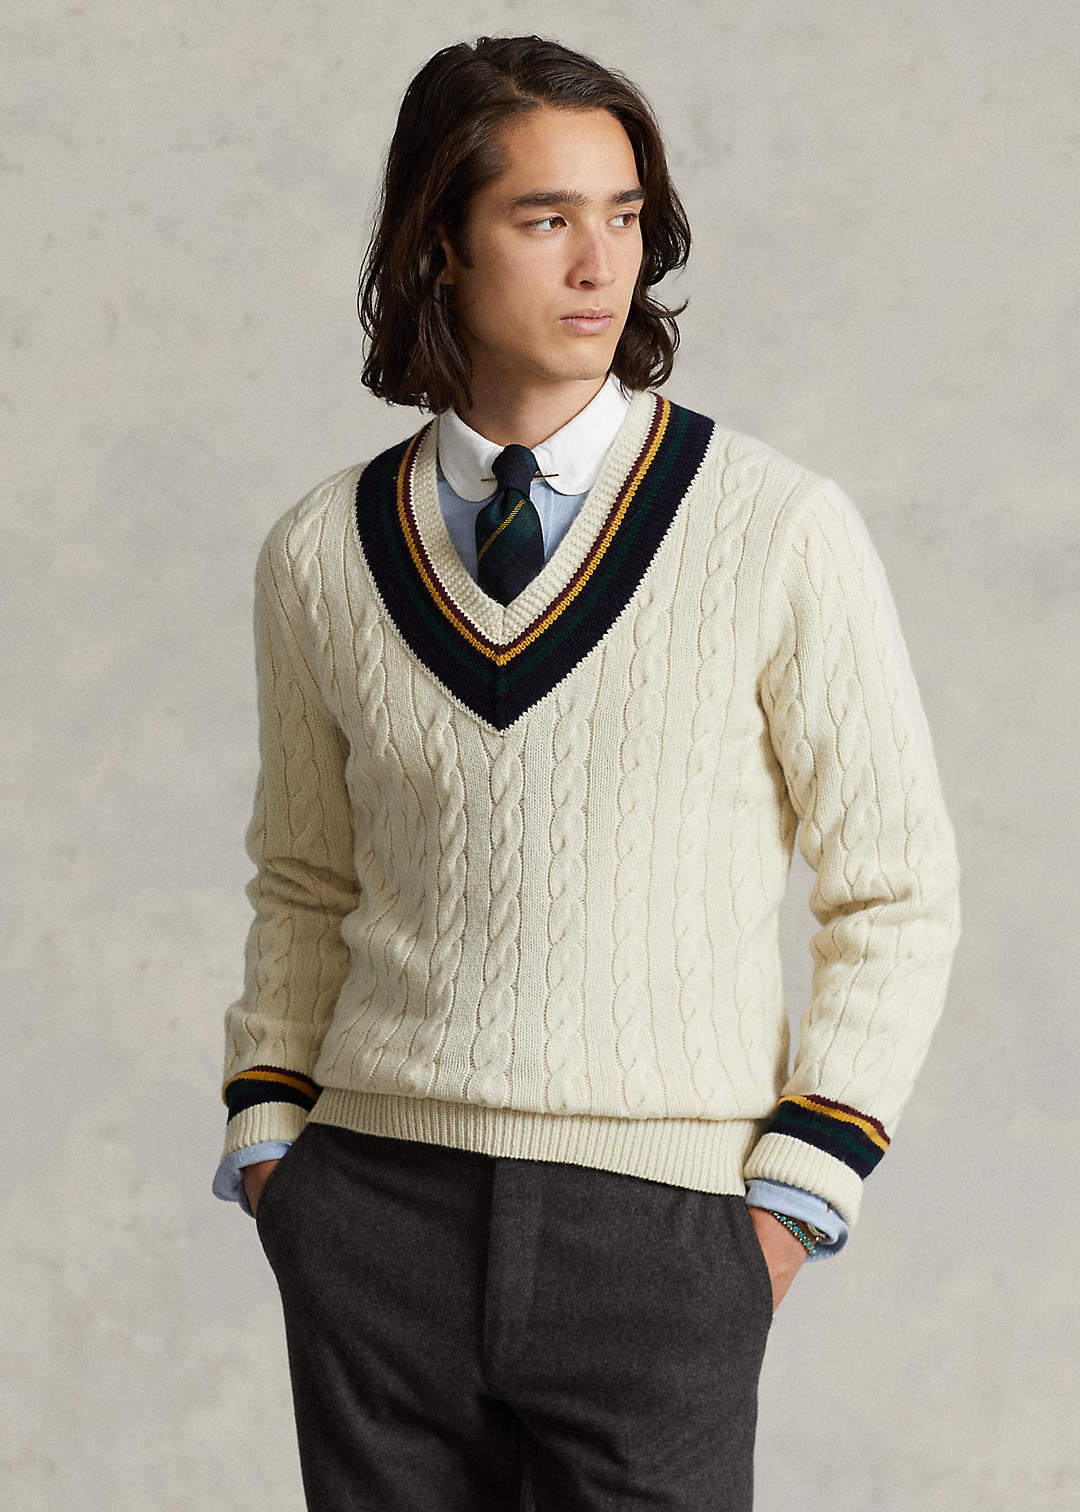 The Iconic Cricket Sweater